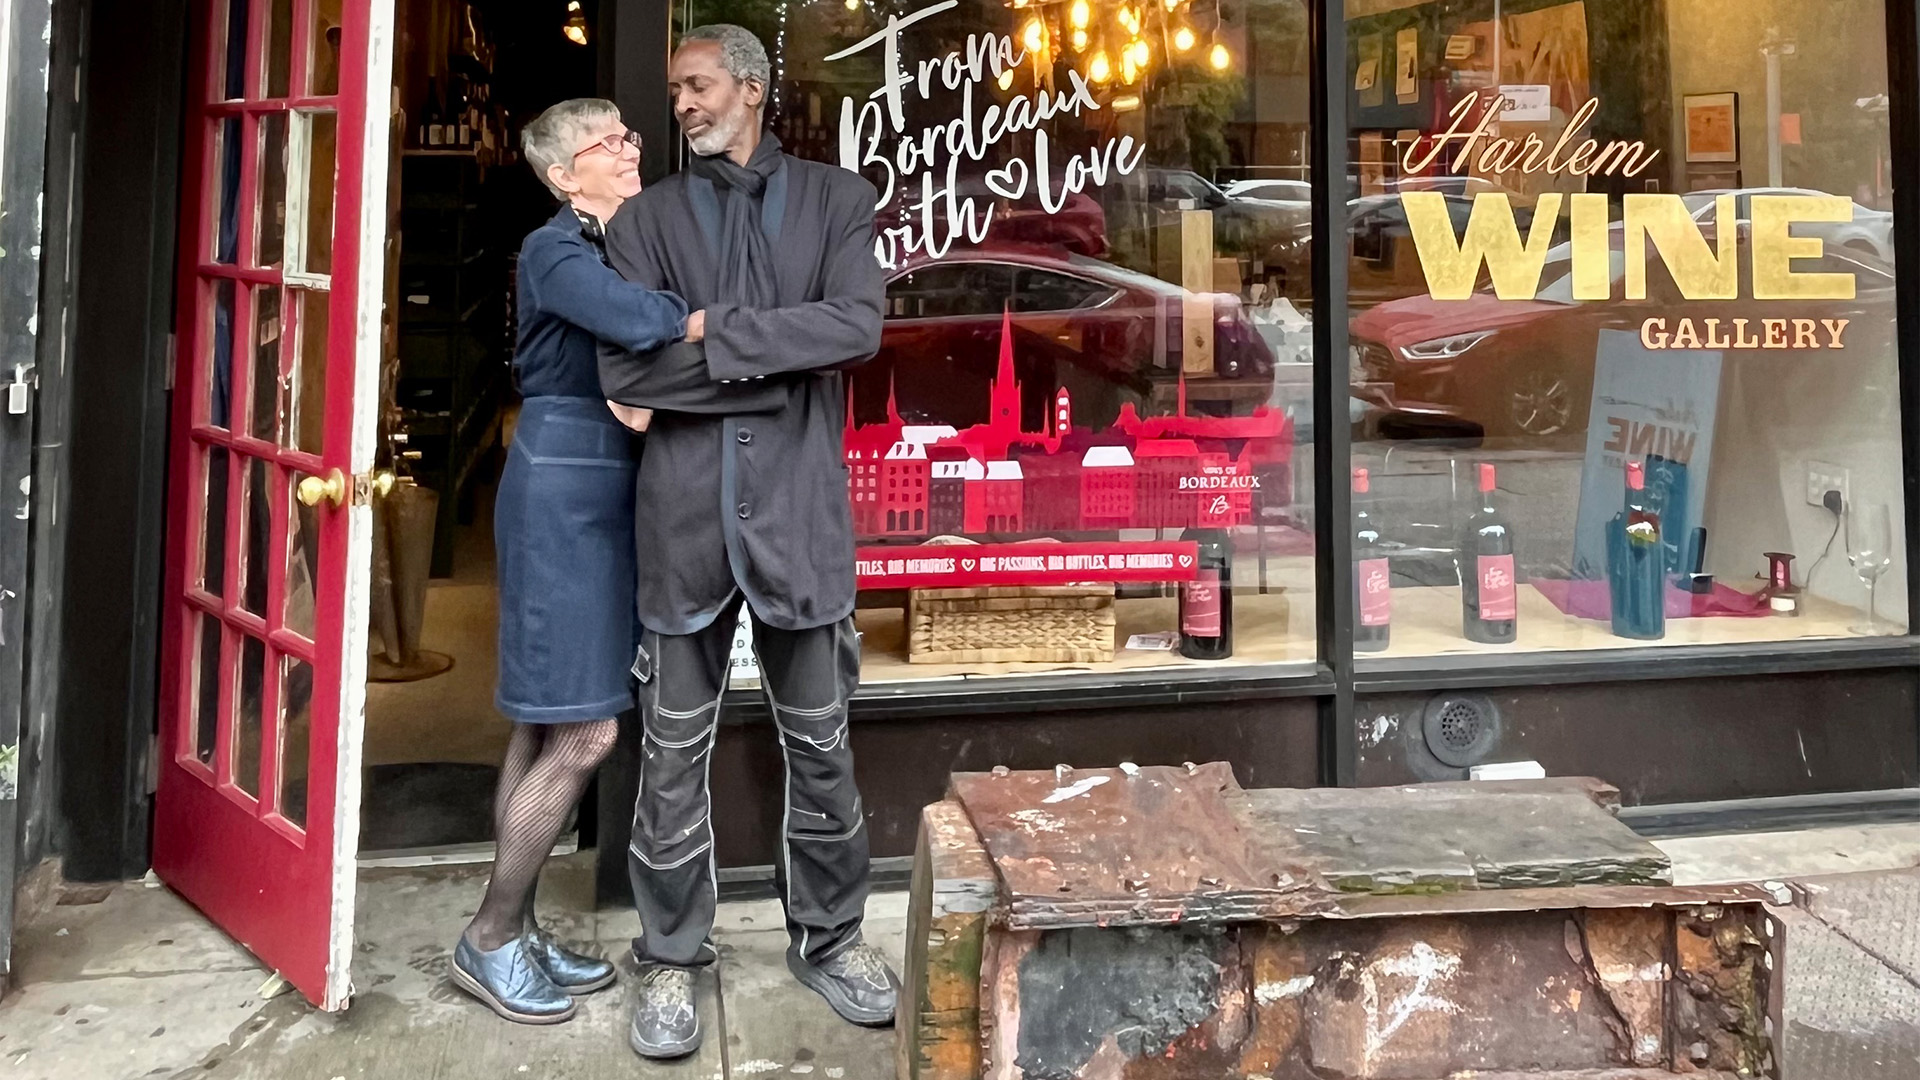 Married Couple's 7-Year-Old Harlem Wine Gallery Reportedly Carries The Largest Selection Of Black Winemakers And Wine Brands In New York City